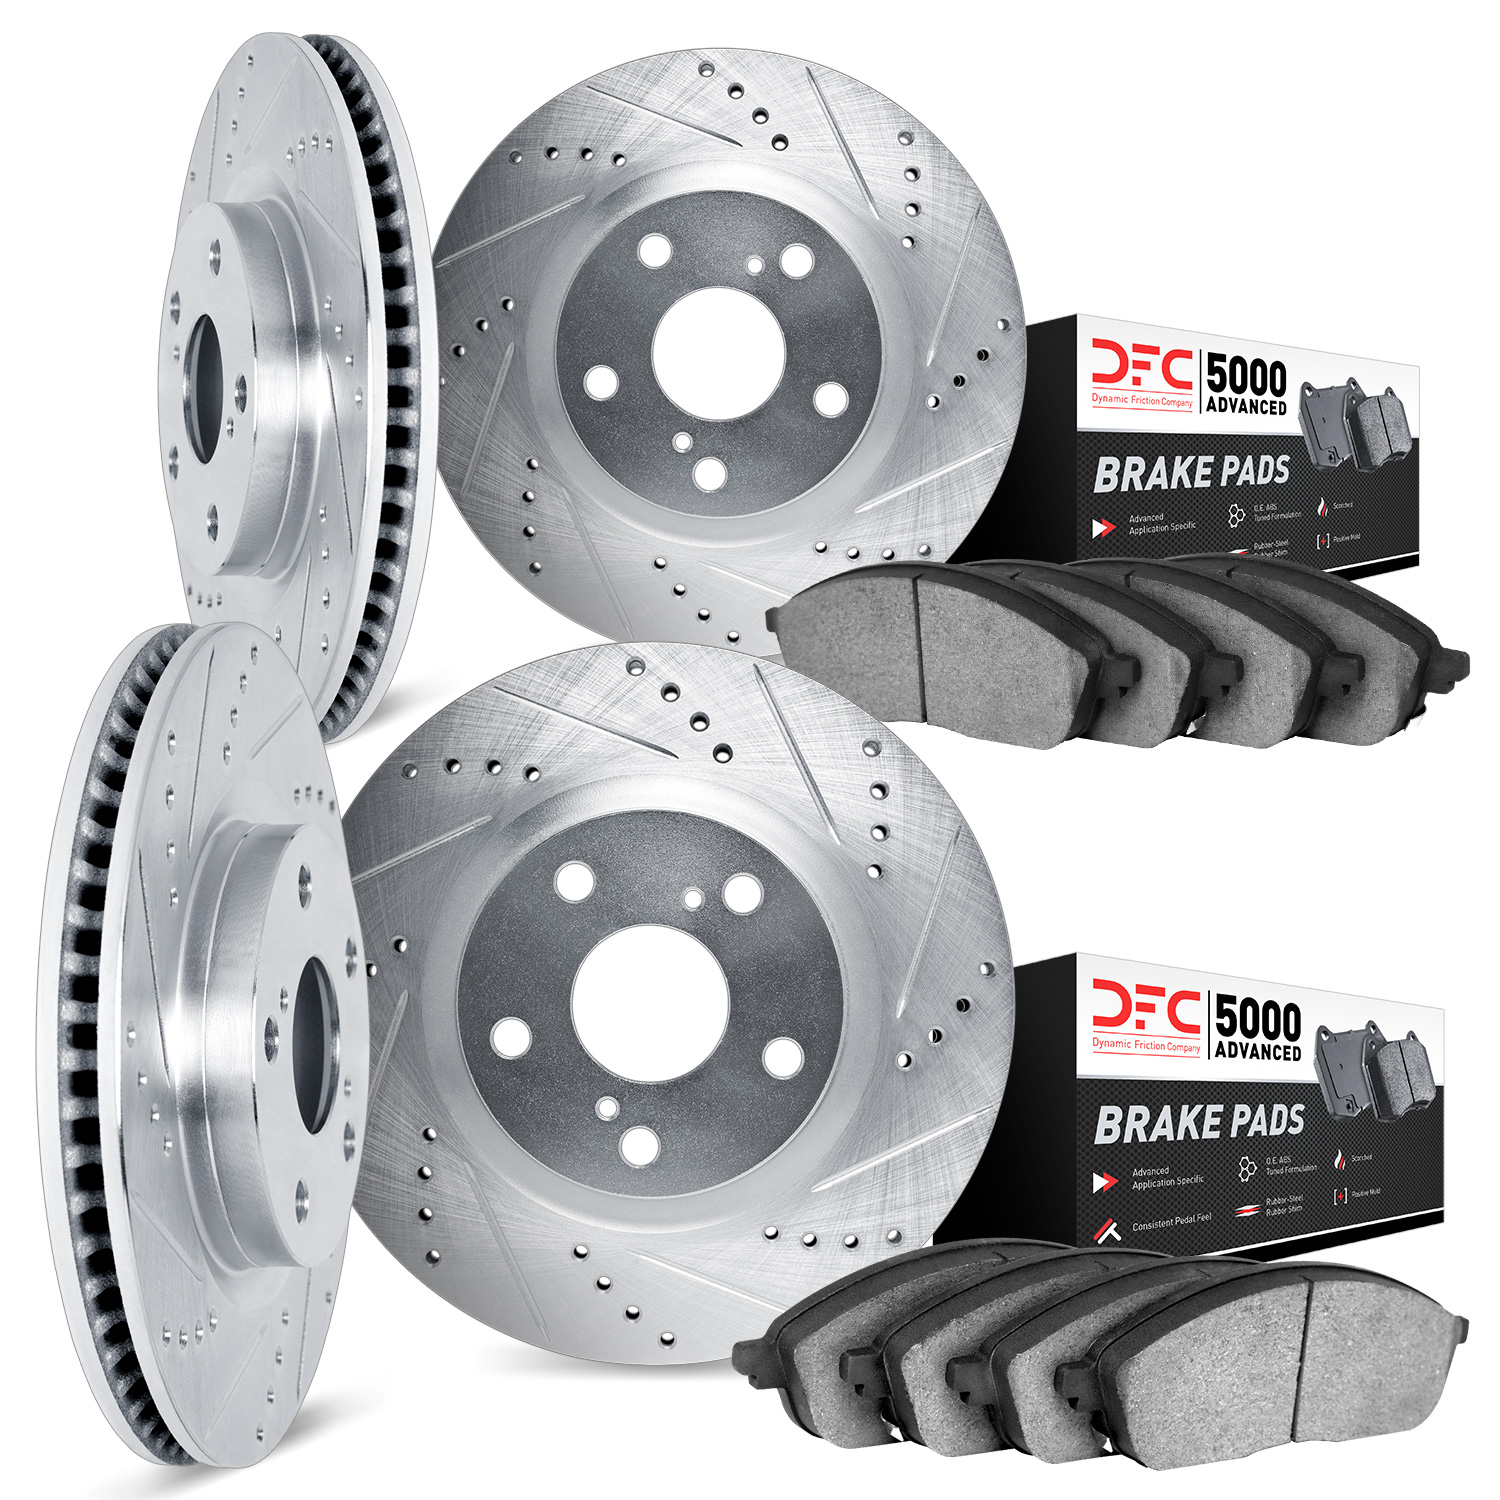 7504-67103 Drilled/Slotted Brake Rotors w/5000 Advanced Brake Pads Kit [Silver], 2011-2019 Infiniti/Nissan, Position: Front and